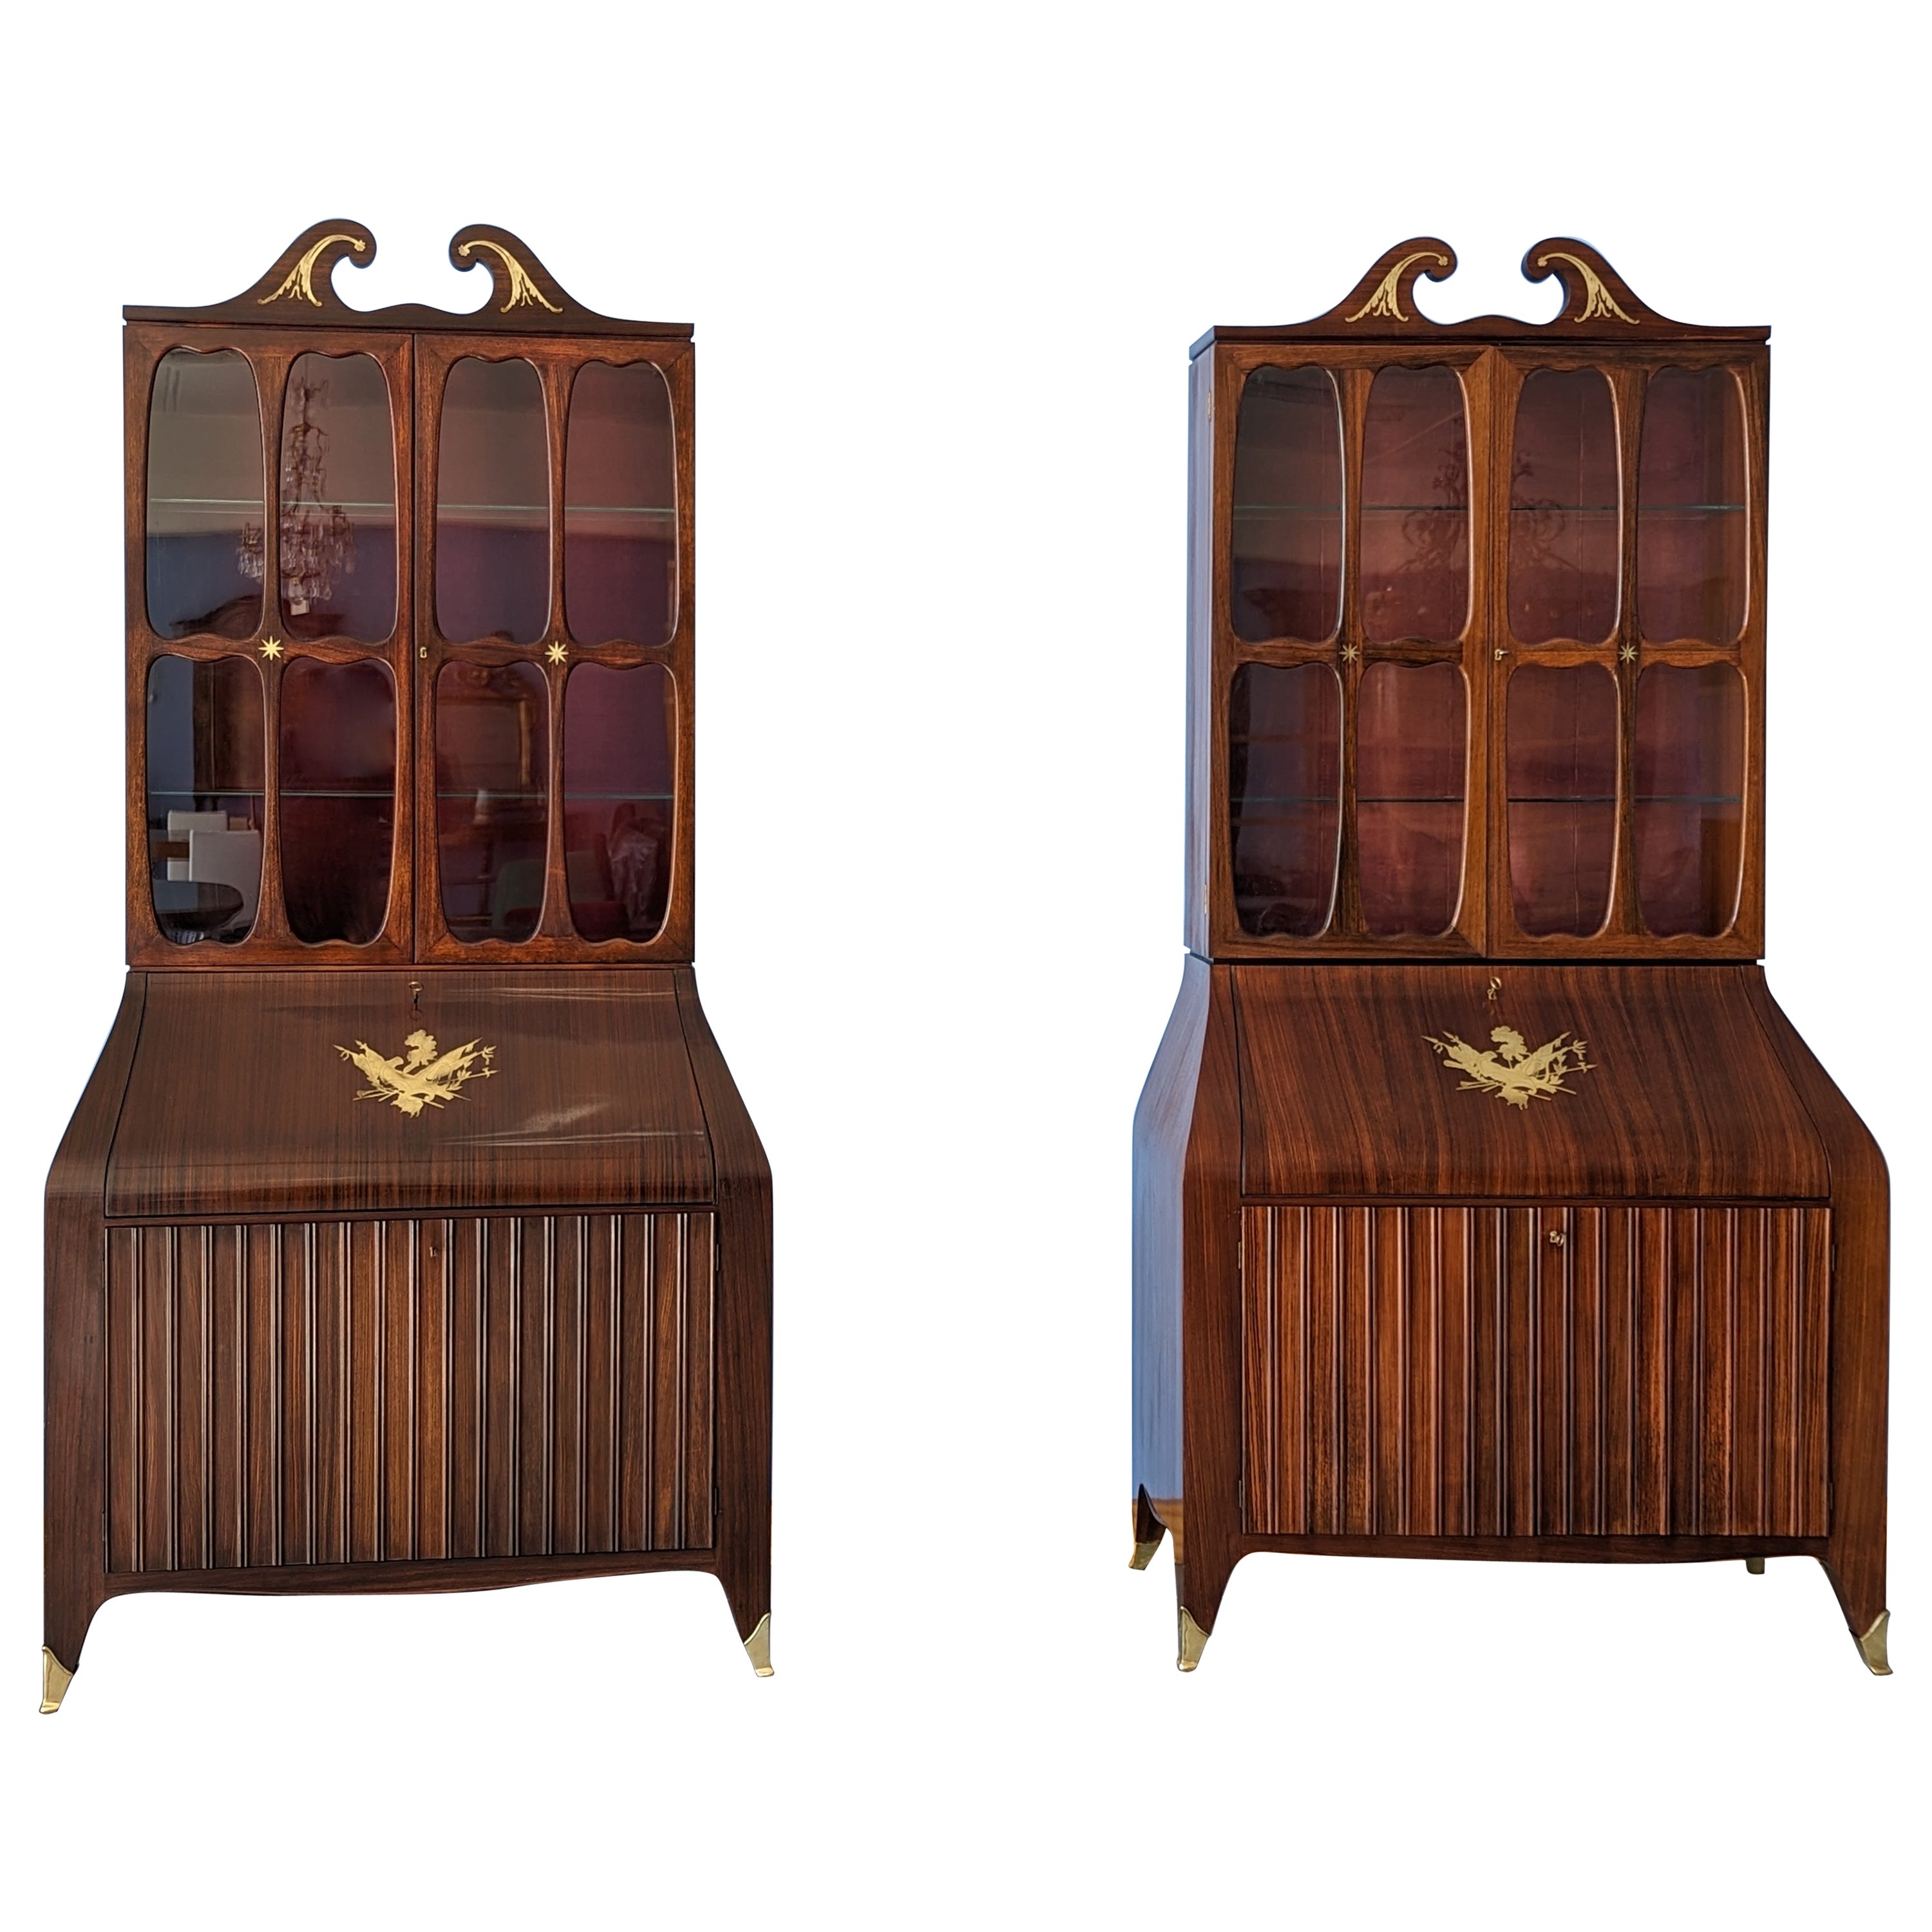 Pair of Trumeau Bookcases in Mahogany Designed by Paolo Buffa, 1950s